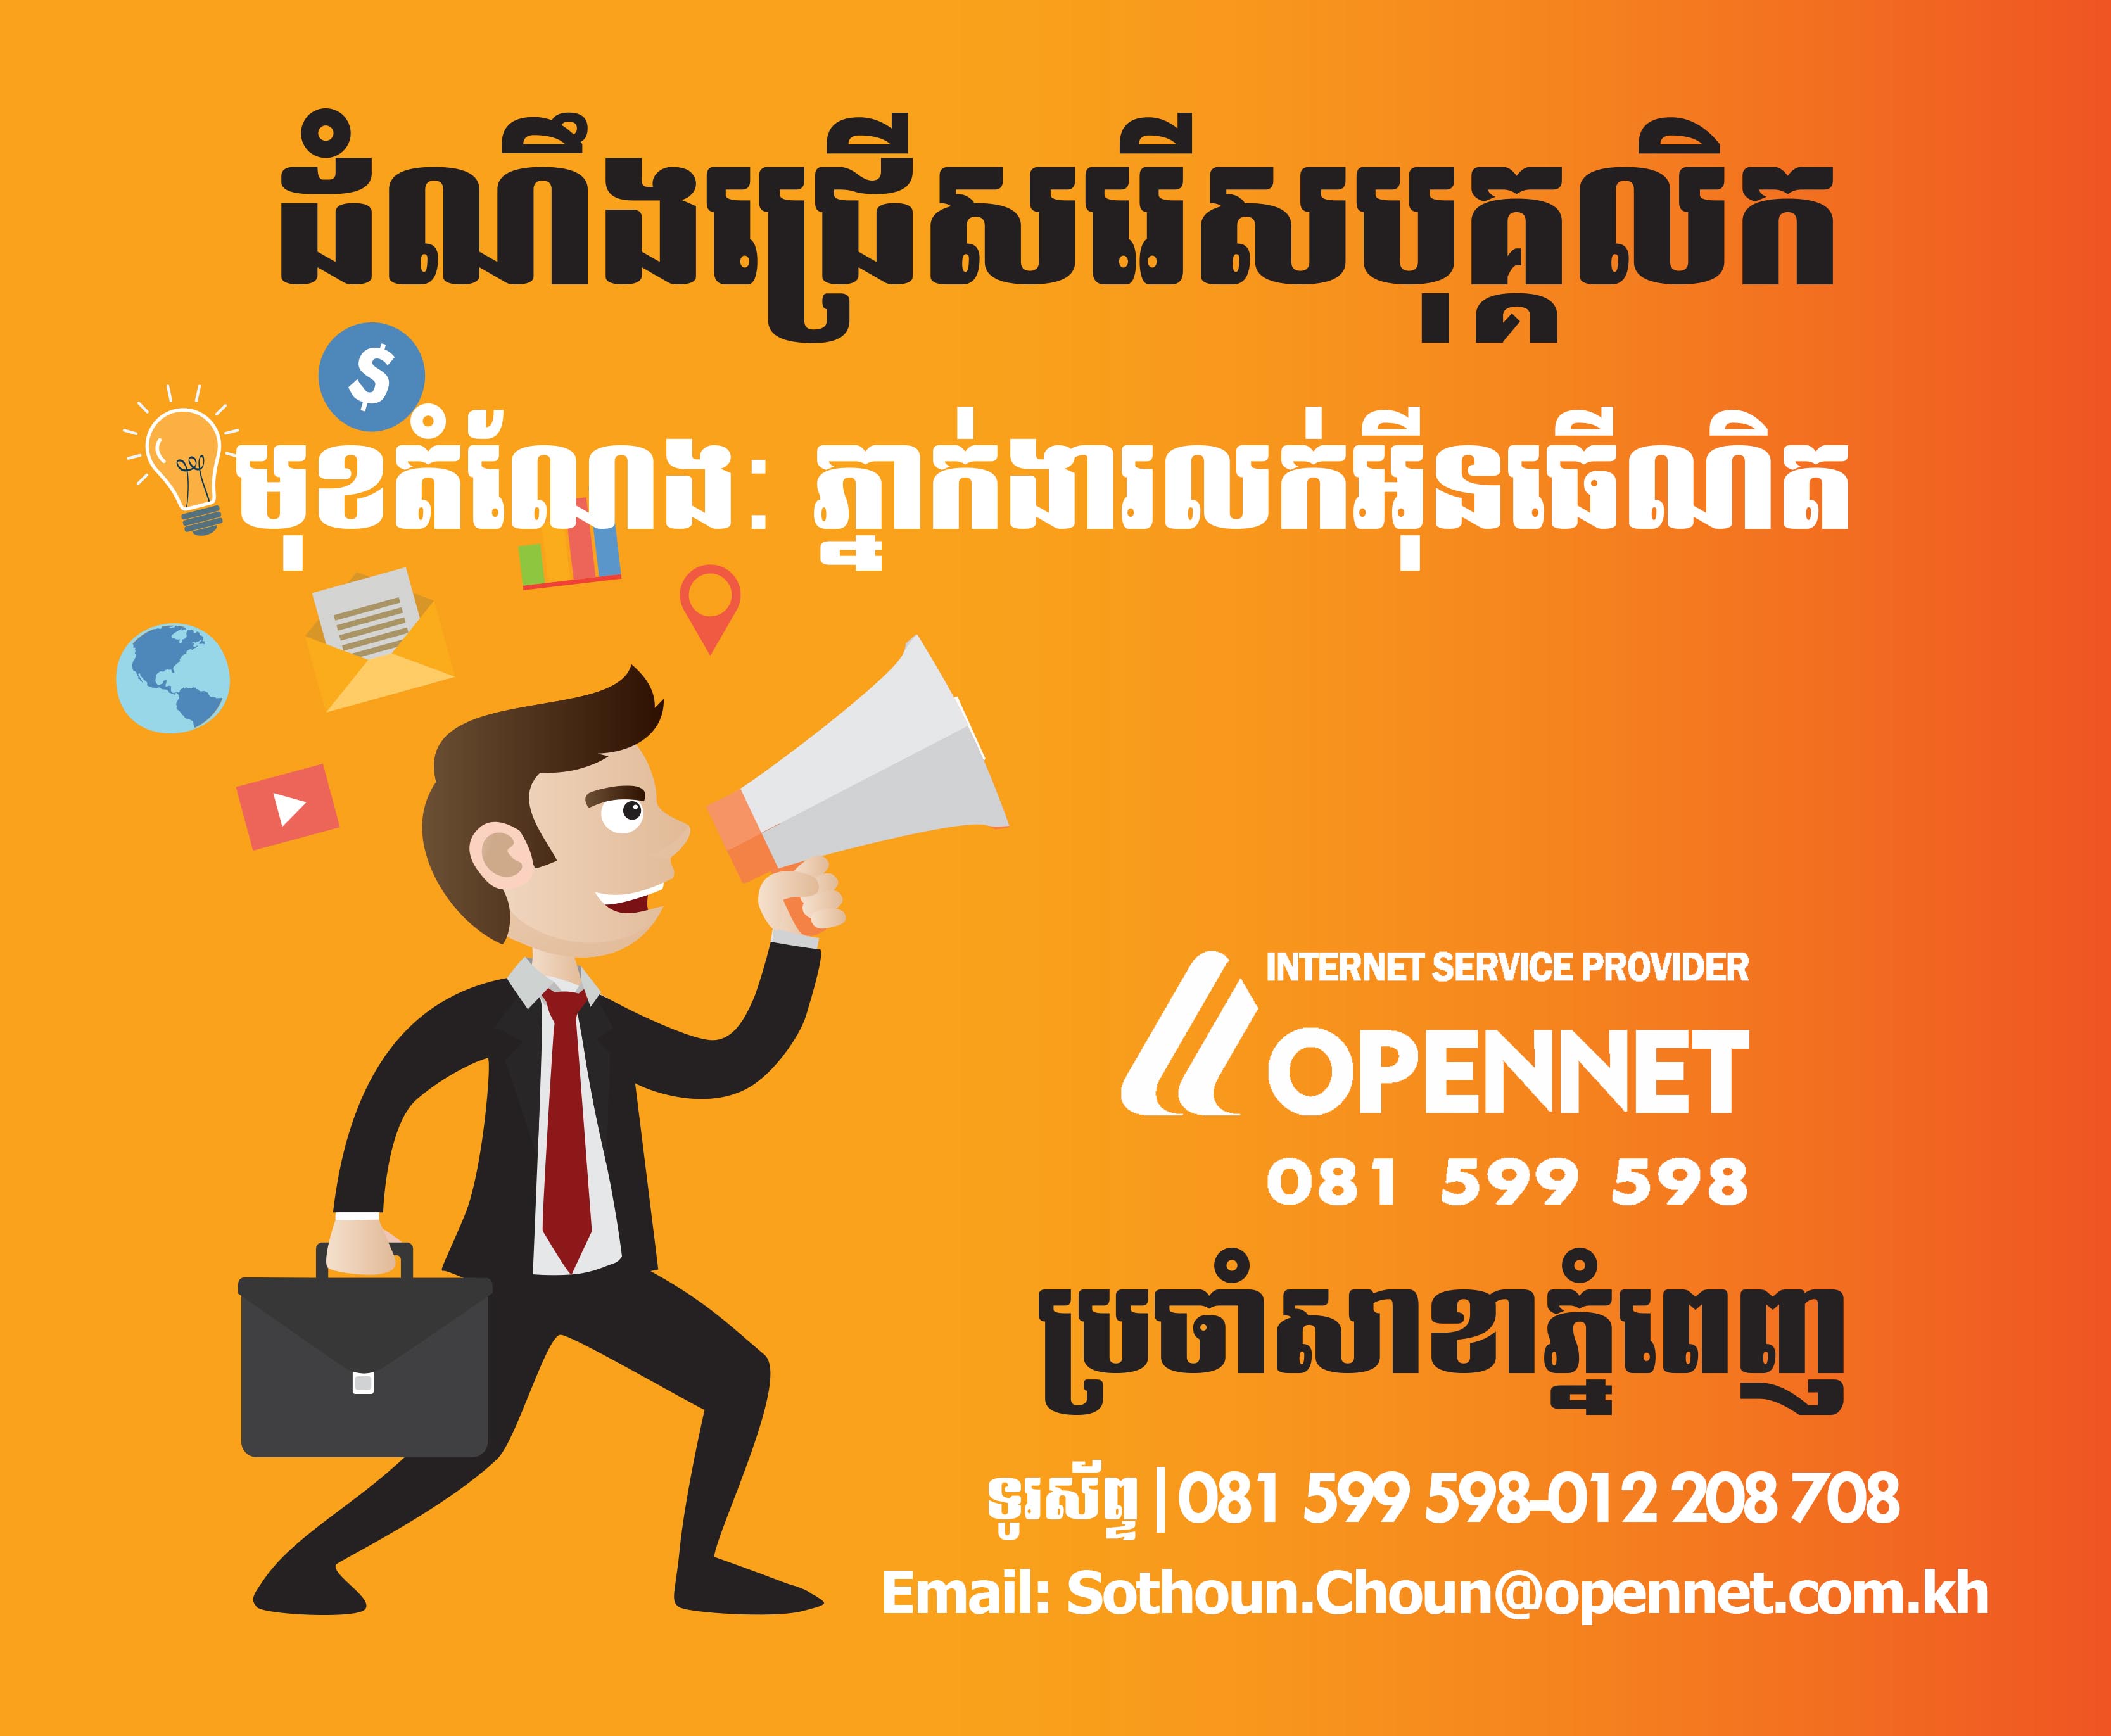 Opennet Cambodia